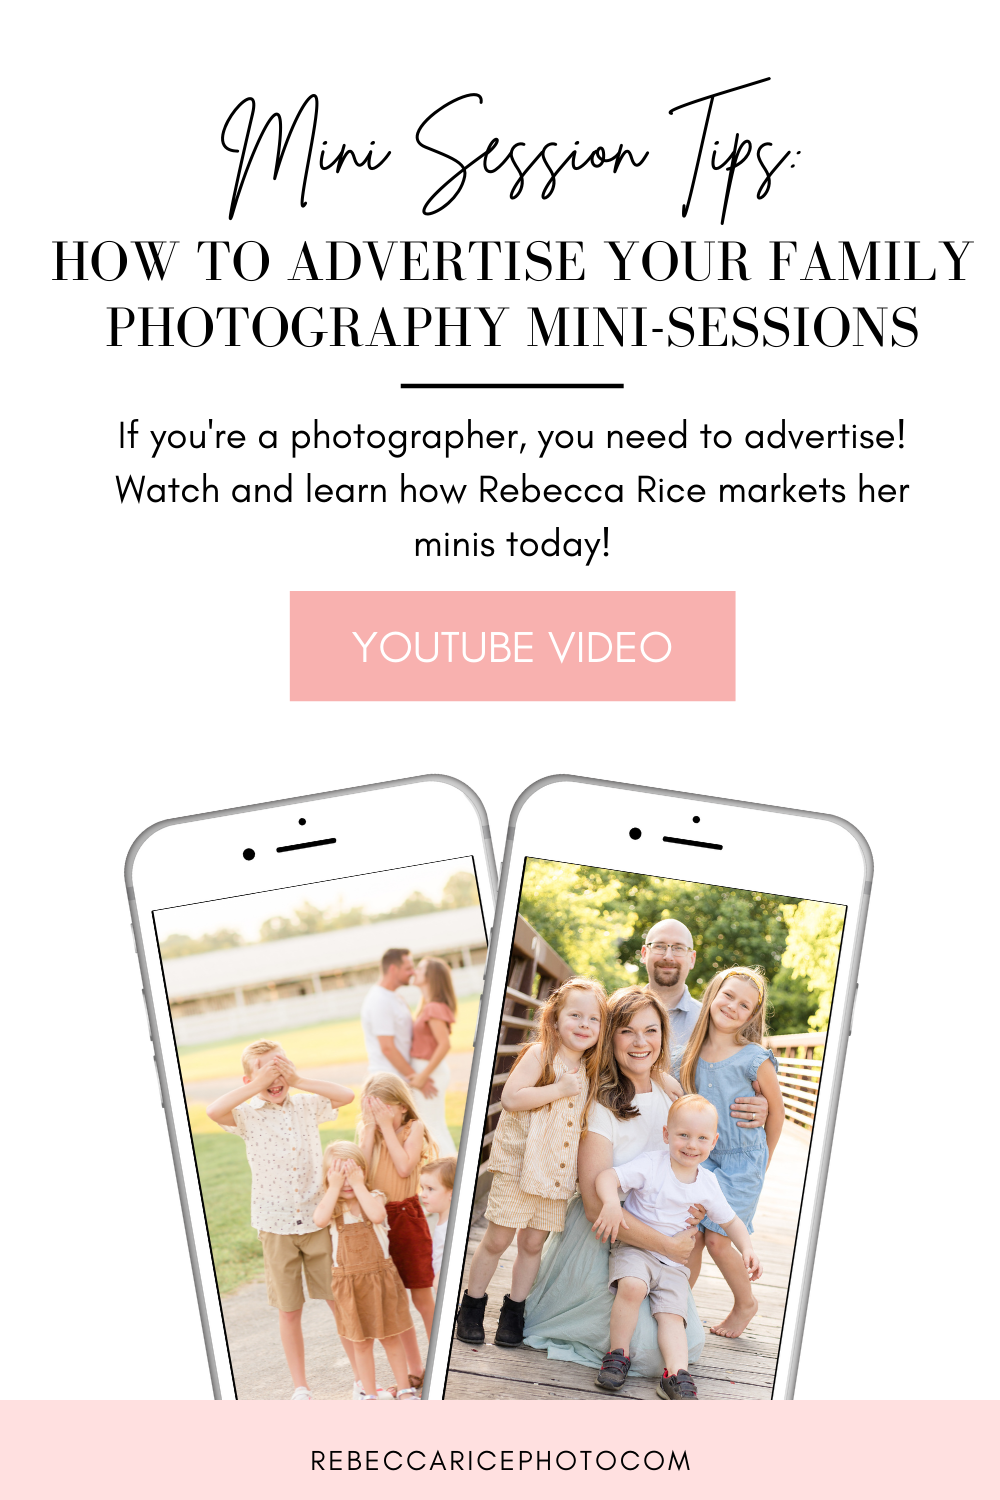 How to Advertise Family Photography Mini Sessions